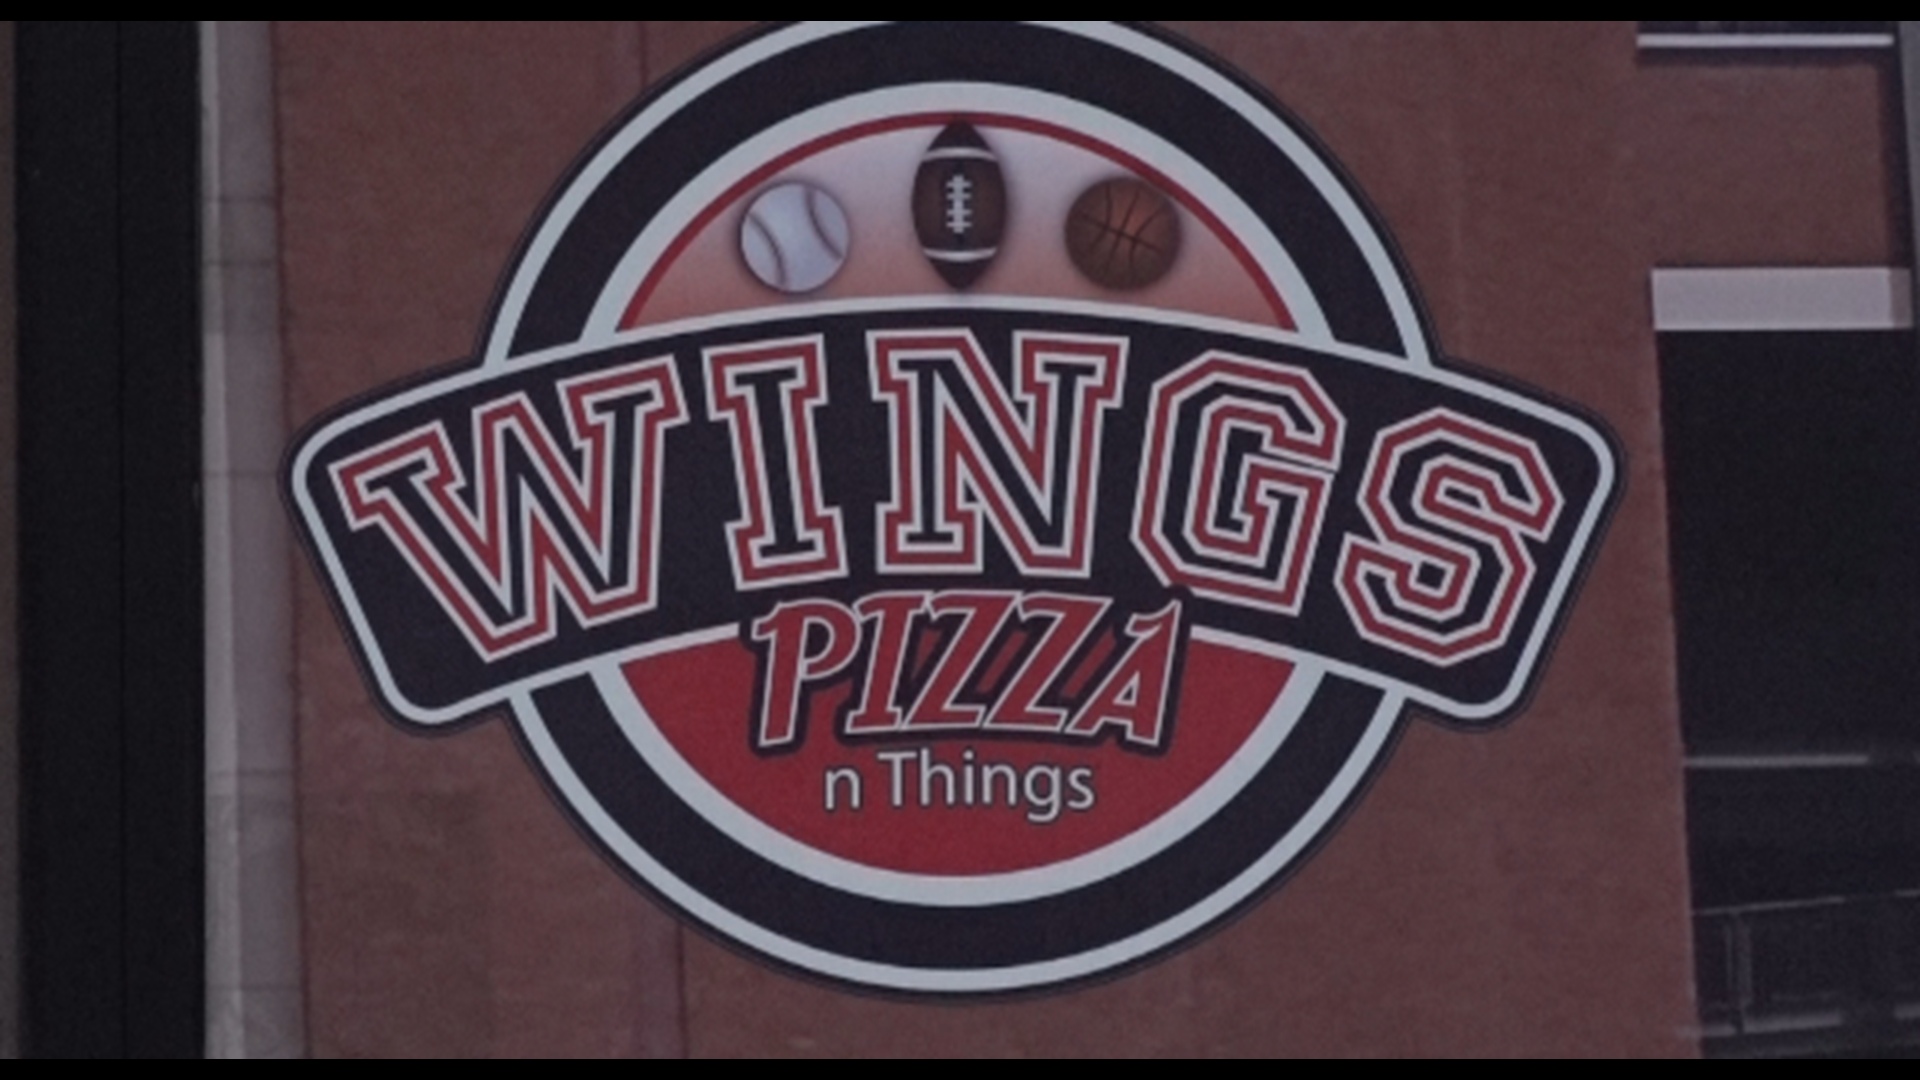 Wings Pizza n Things remained open Wednesday night to help employees stay afloat.